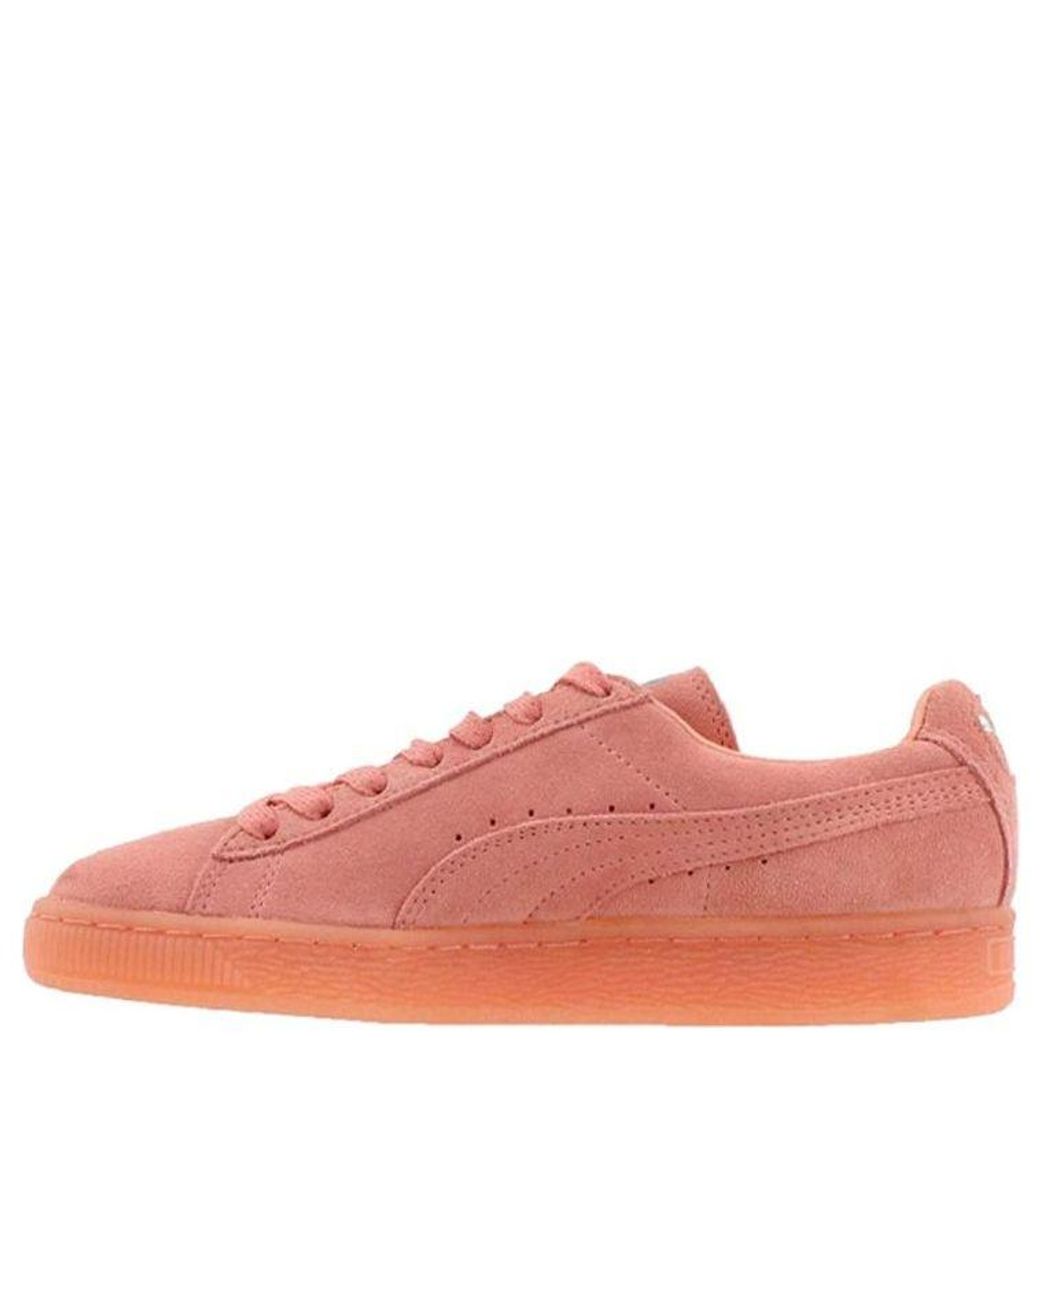 PUMA Suede Classic Mono Reflected Iced Pink | Lyst